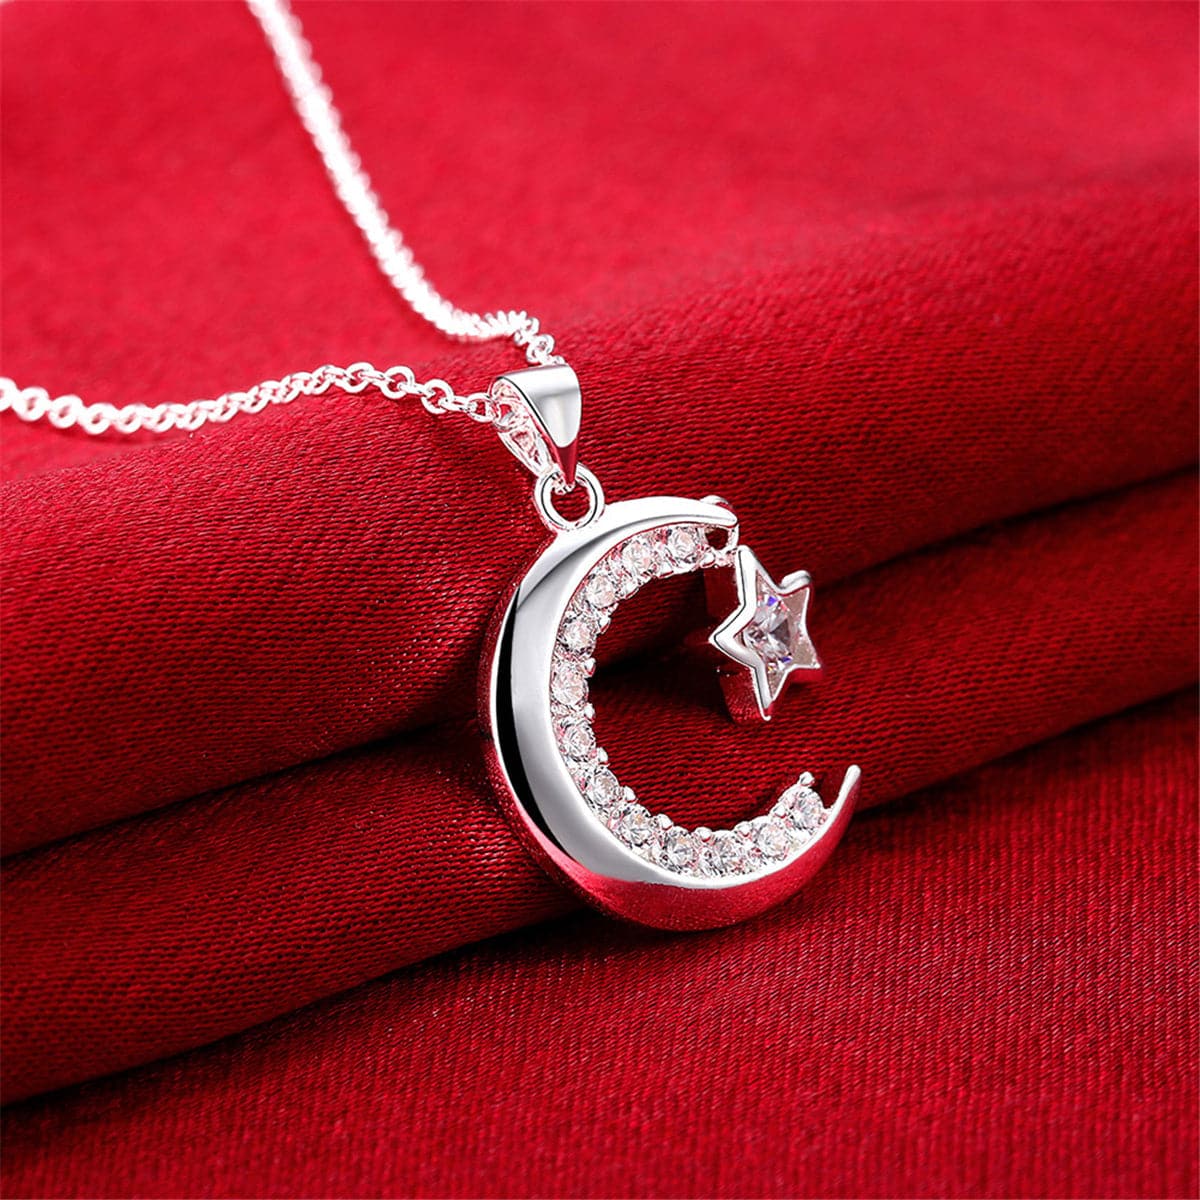 Cubic Zirconia & Silver-Plated Mood Pendant Necklace - streetregion